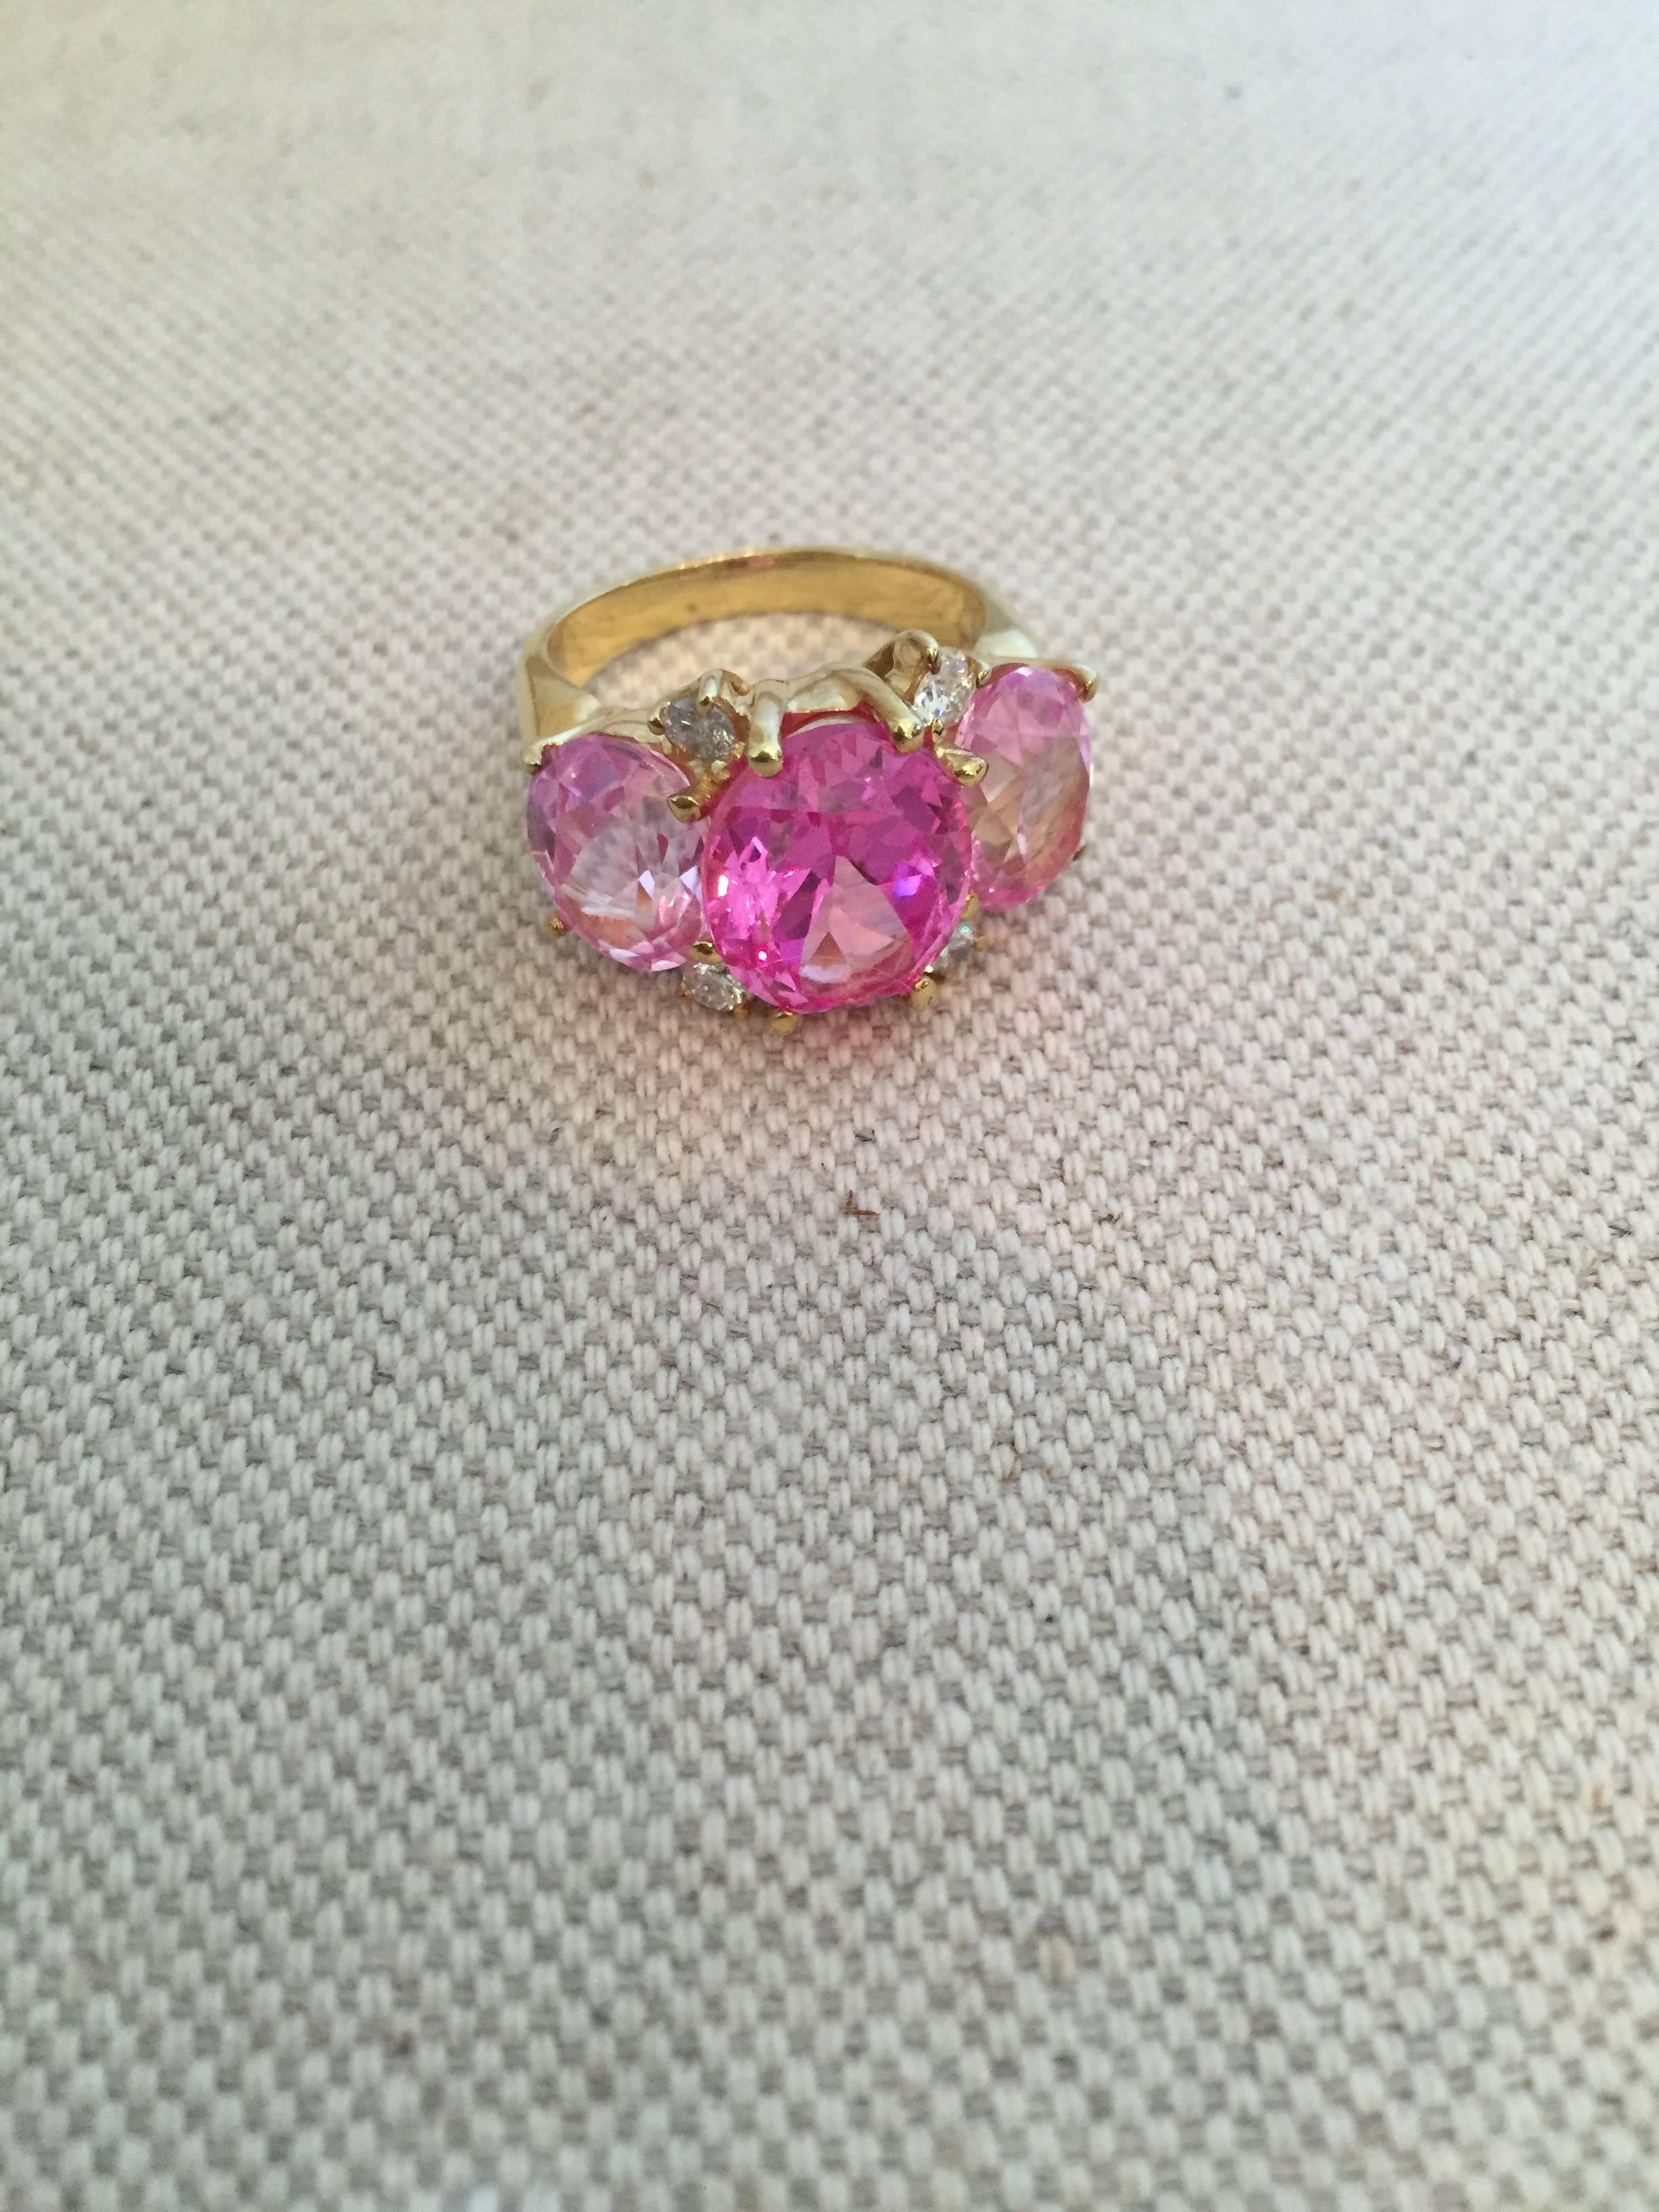 18kt Yellow Gold Medium GUM DROP™ Ring with faceted oval shaped center Pink Topaz and two oval faceted Pink Topaz and four round Diamonds ~0.50cts

The Ring measures ~ 1